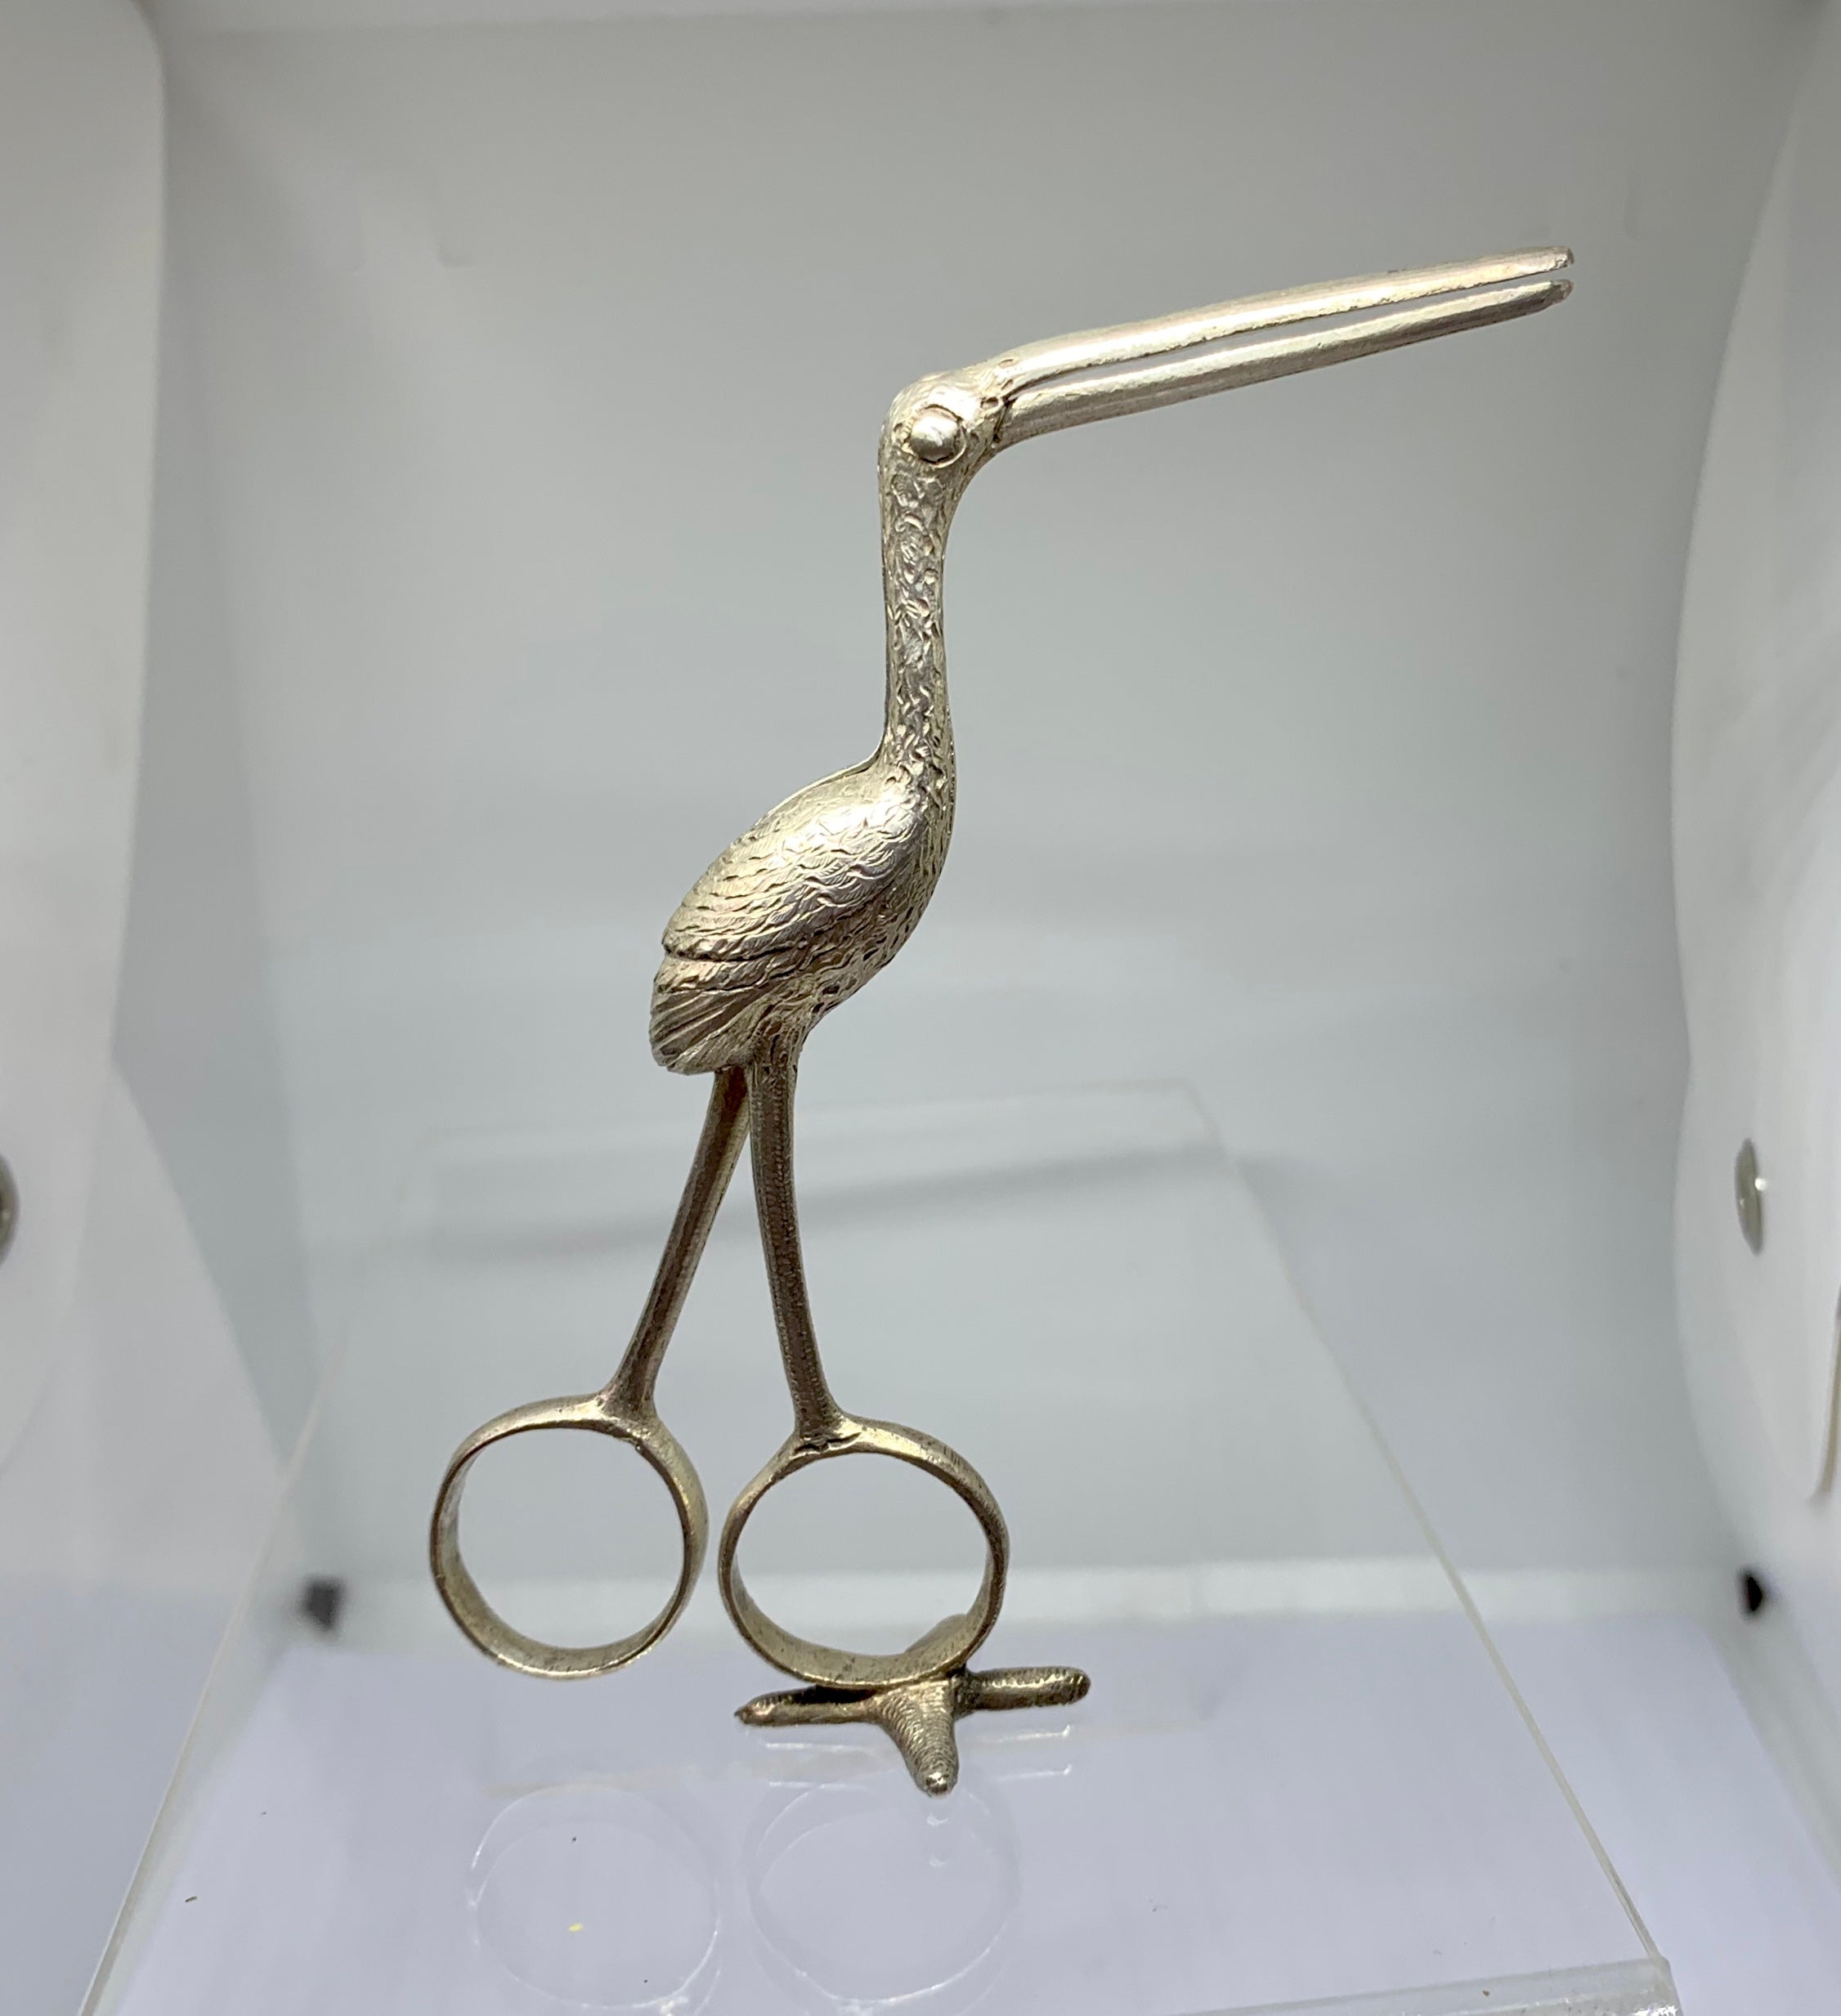 This is a rare pair of antique 19th Century Silver Birth Announcement Stork Scissors with a swaddled baby infant in the body of the stork.
The Silver birth stork scissors served as a birth announcement and were used to cut the umbilical cord. The